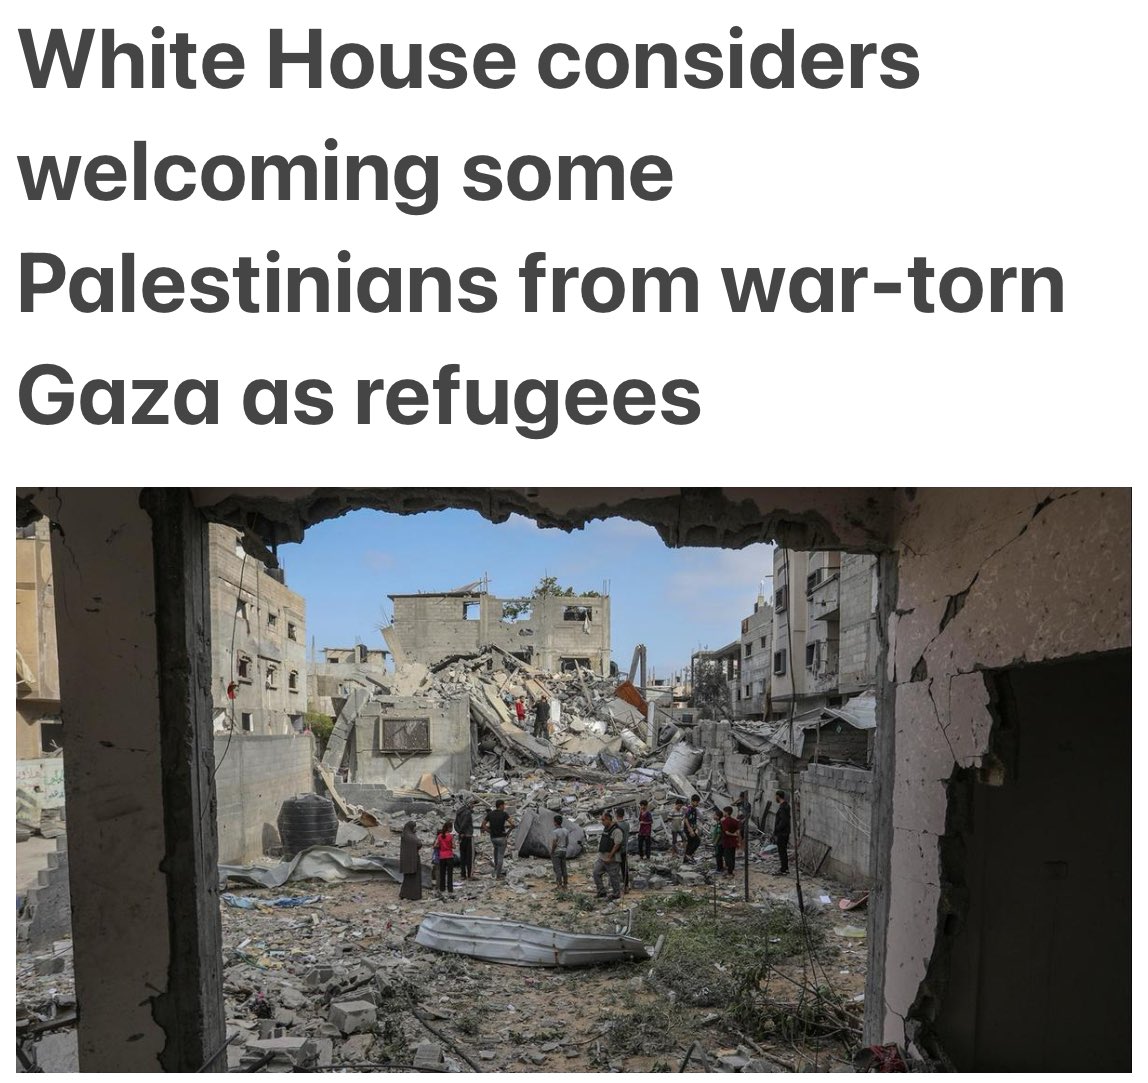 White House considers welcoming some Palestinians from war-torn Gaza as refugees. -CBS